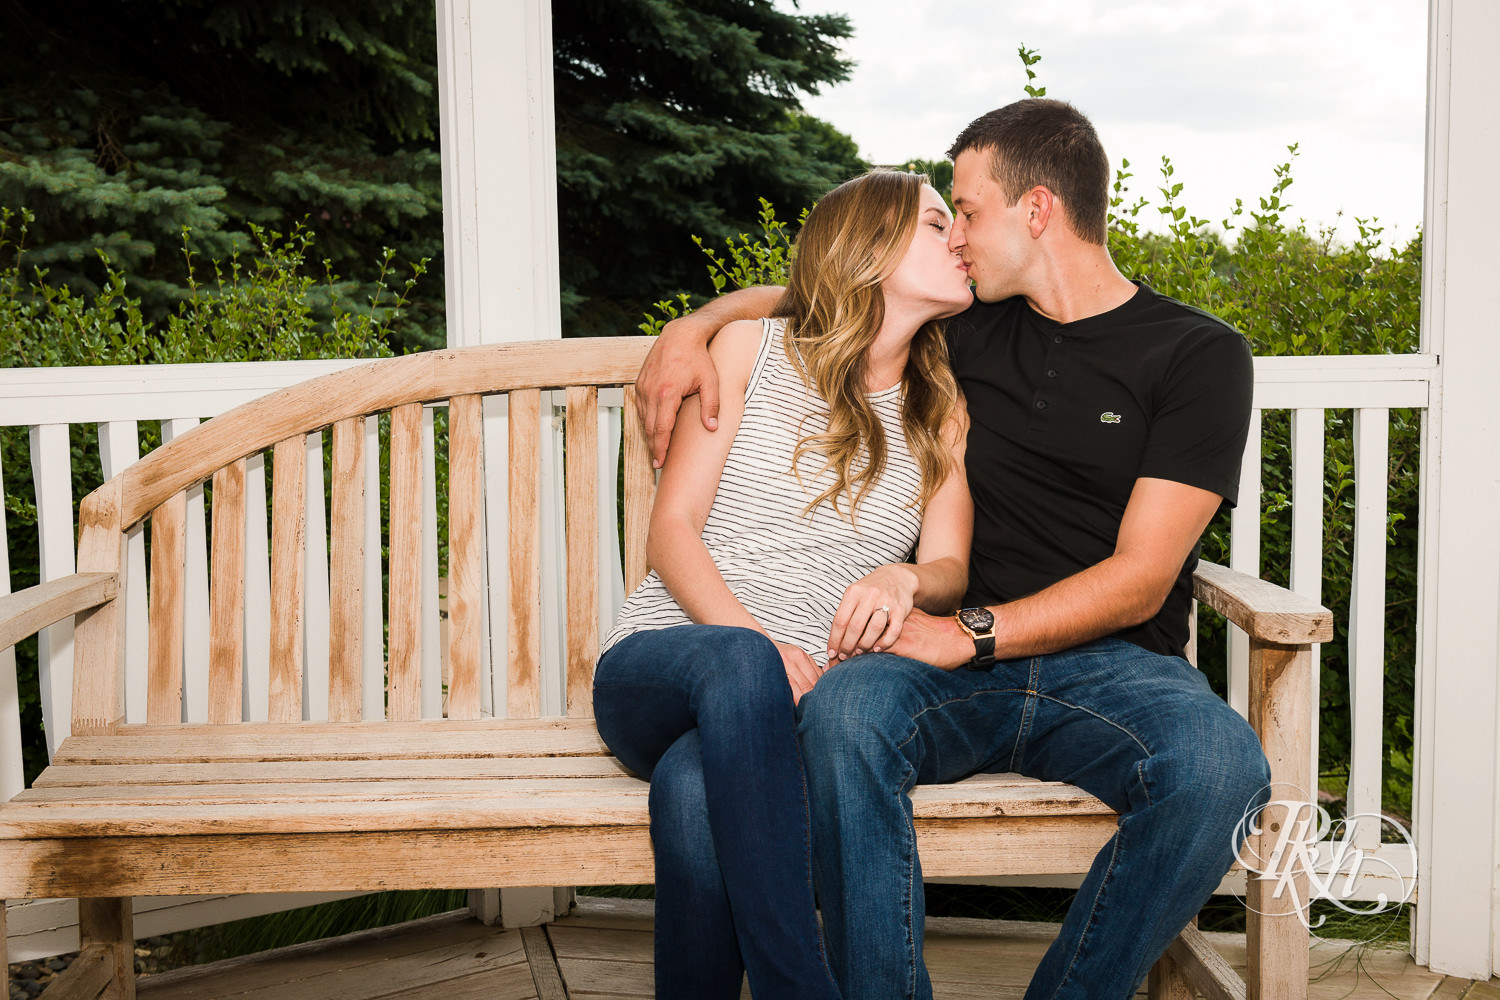 Man and woman in T-shirts and jeans kiss on bench in Centennial Lakes Park in Edina, Minnesota.